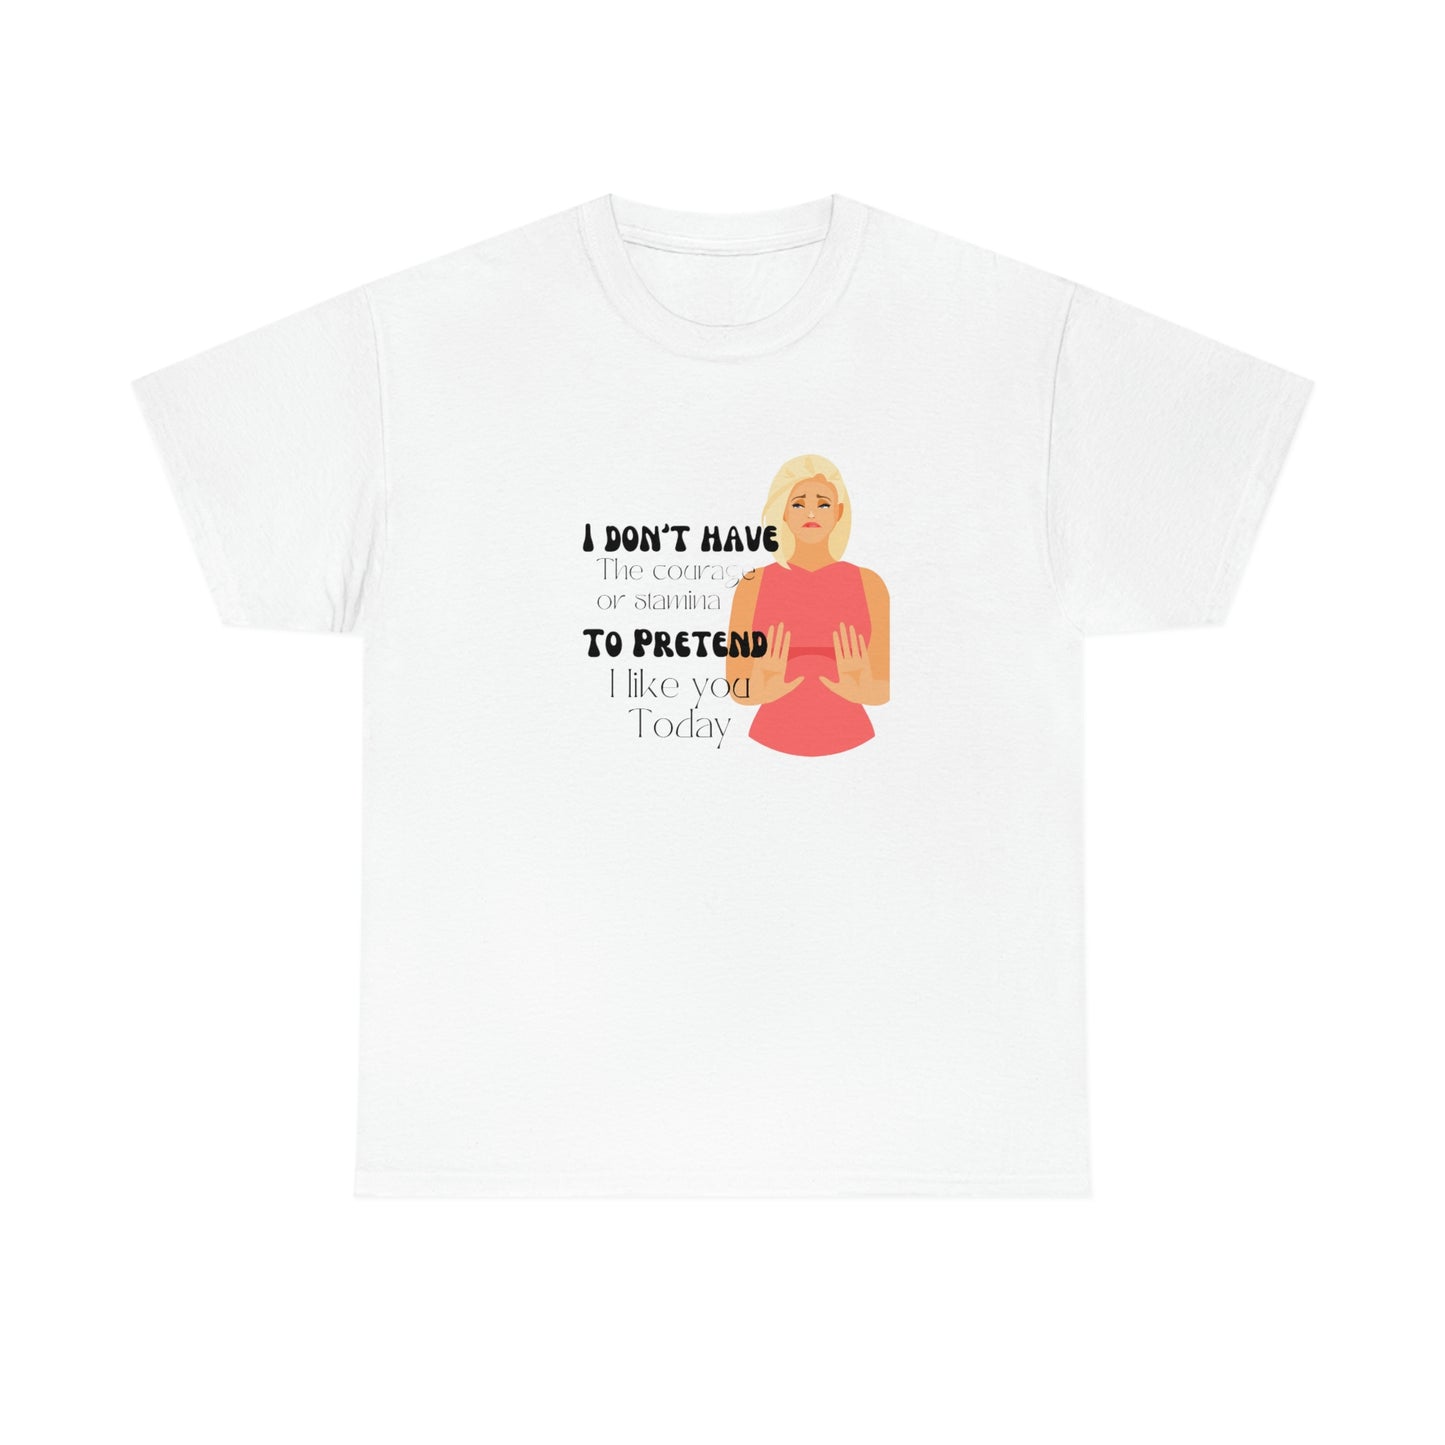 ‘I don’t have the Courage or Stamina to Pretend I like you Today’ Printed Front & Back.  Unisex Heavy Cotton Tee